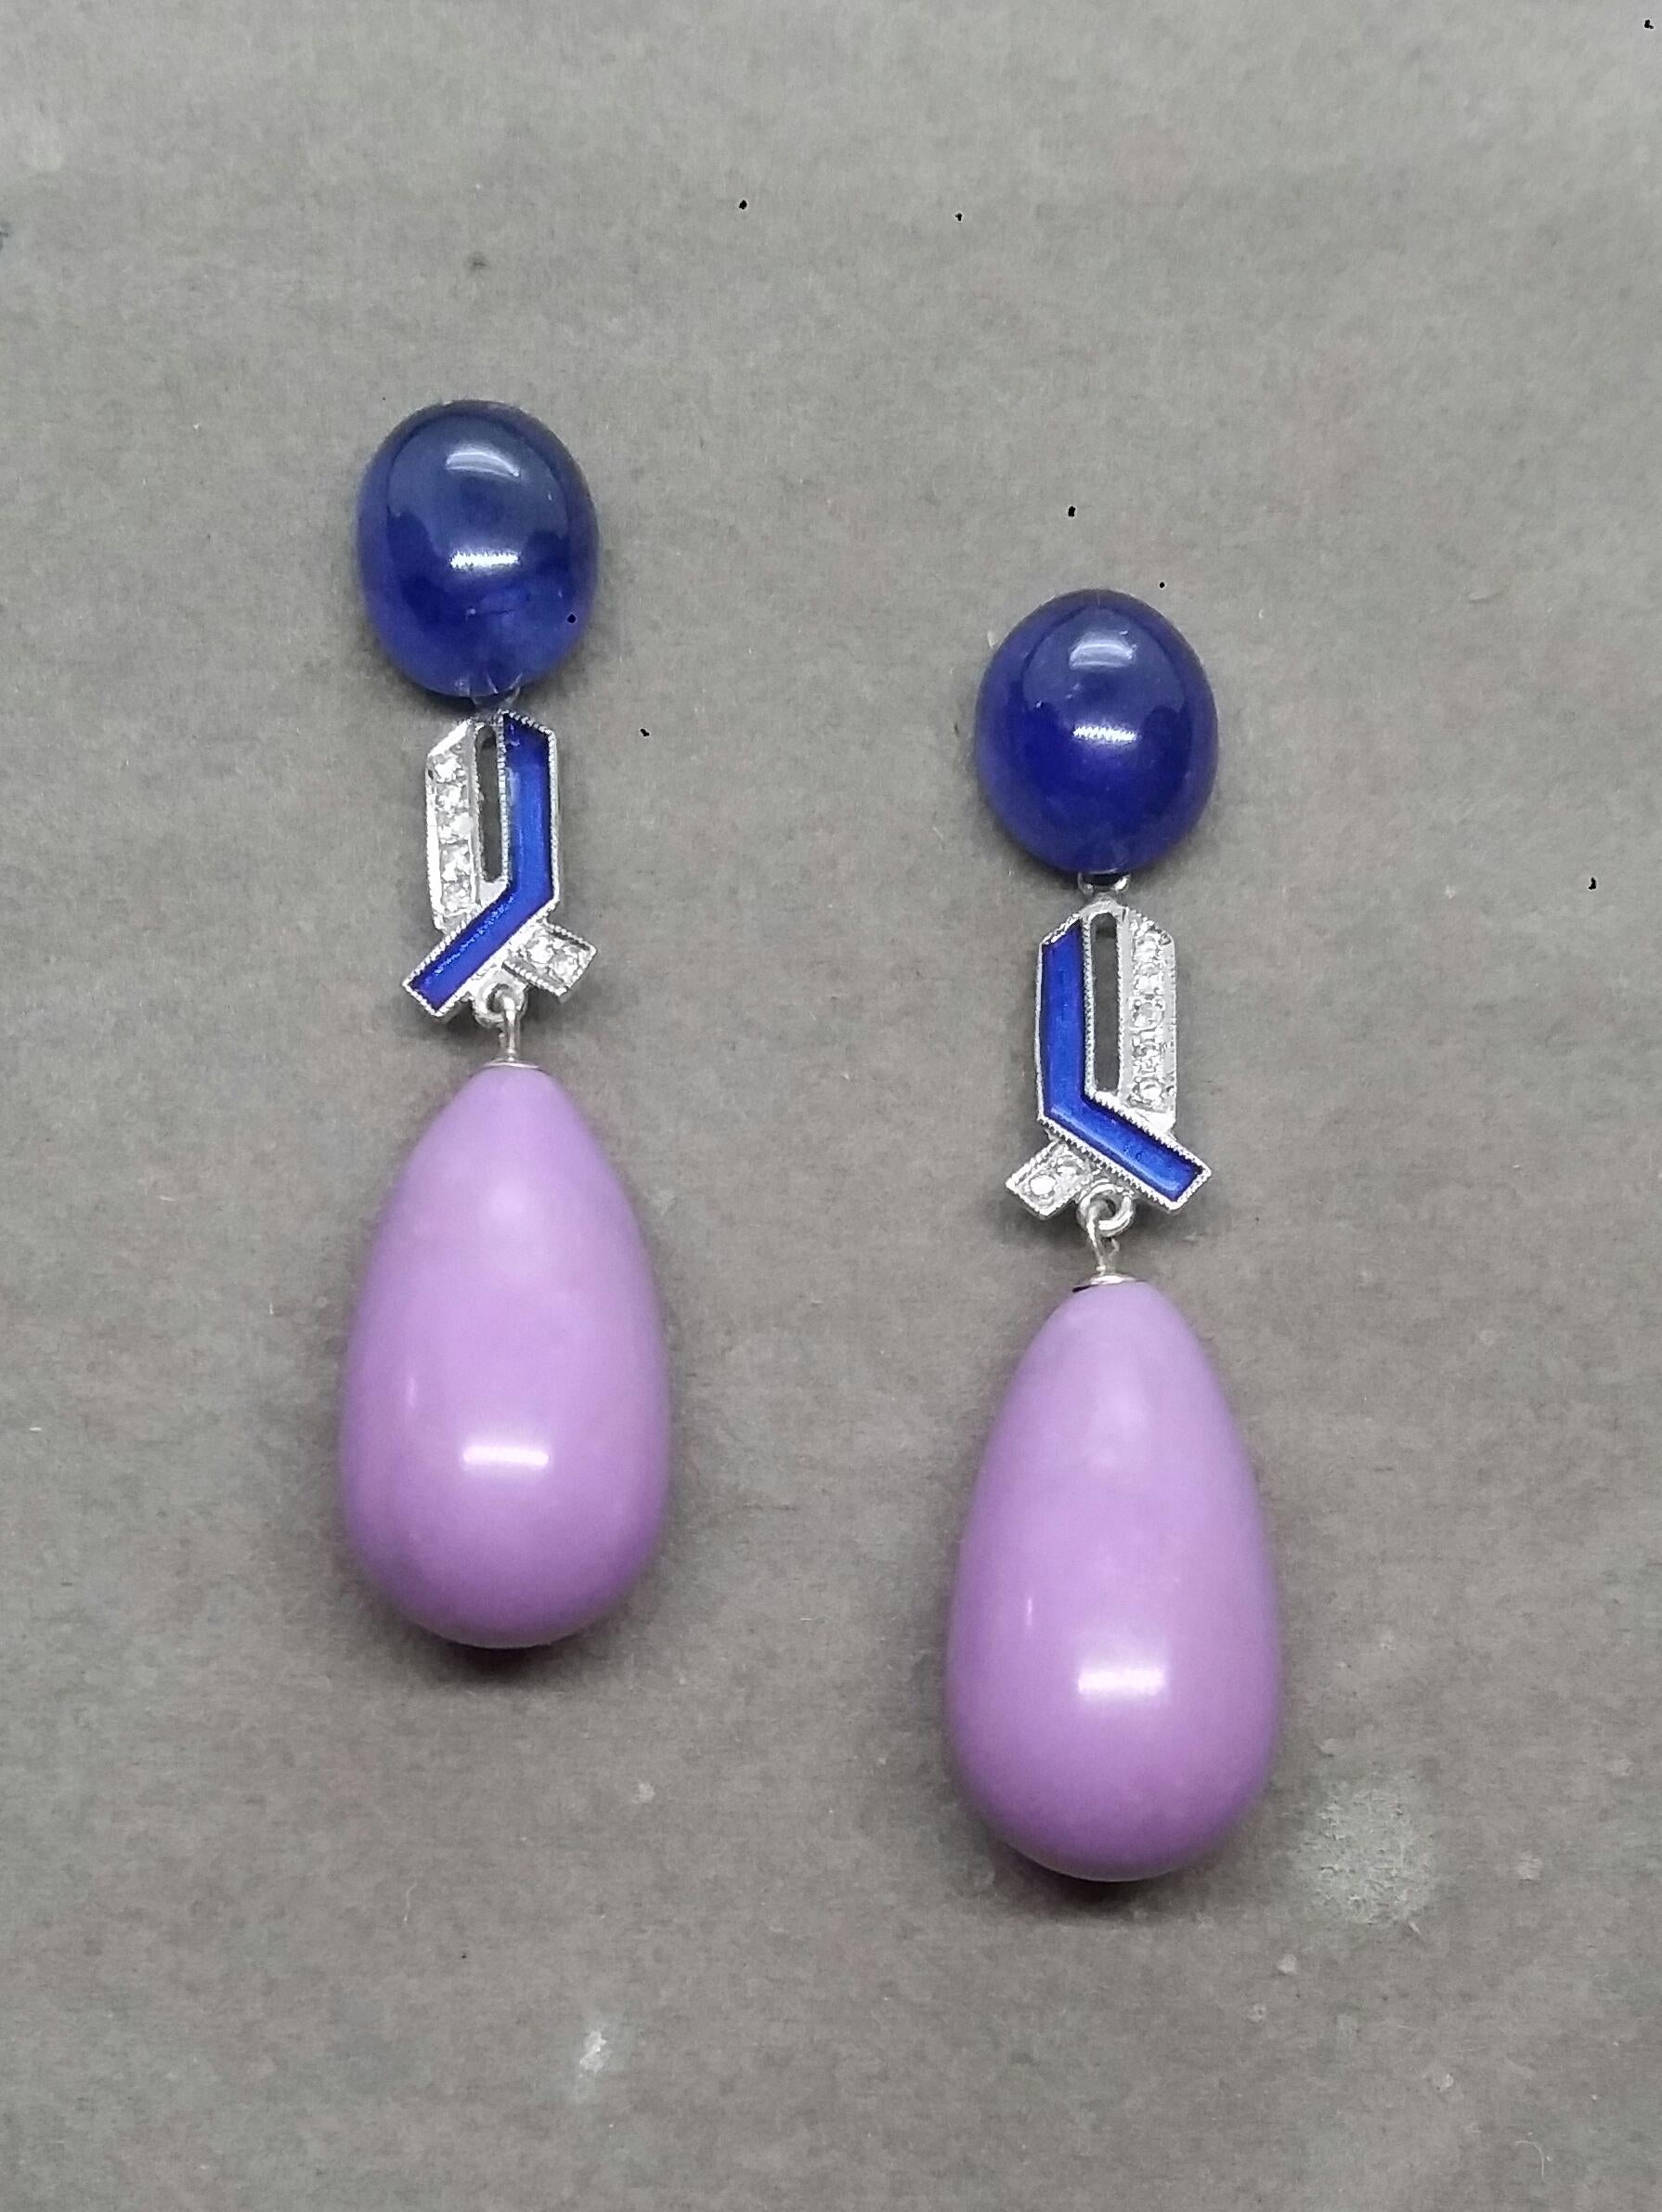 In these earrings 2 large Blue Sapphire cabochons support 2 white gold elements and diamonds while at the bottom we have 2 Phosphosiderite drops measuring 22 x 12 mm.
In 1978 our workshop started in Italy to make simple-chic Art Deco style